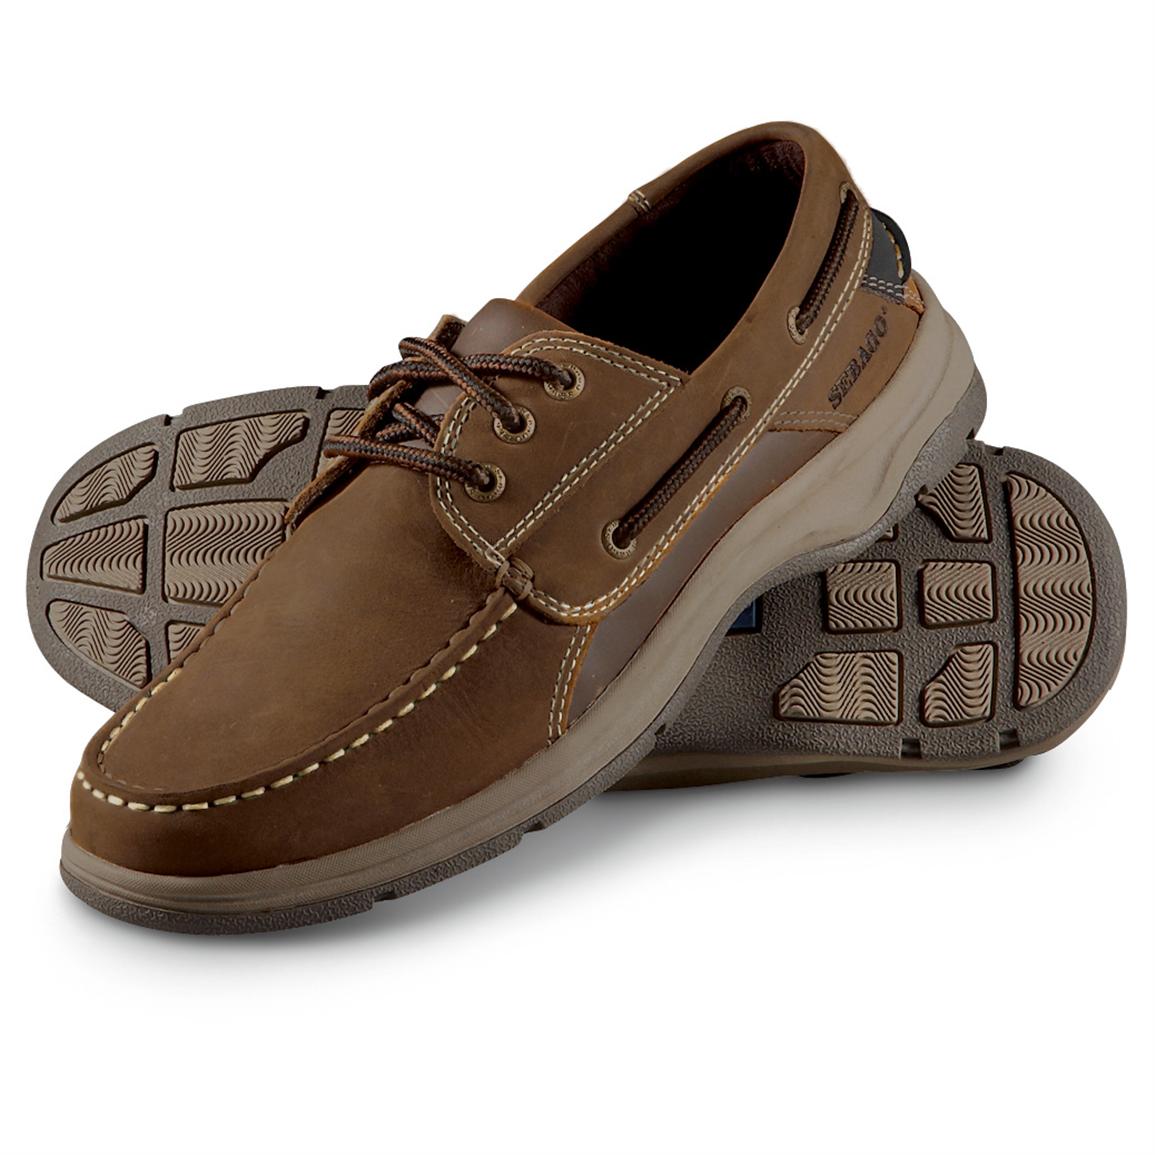 blue fin boat shoes